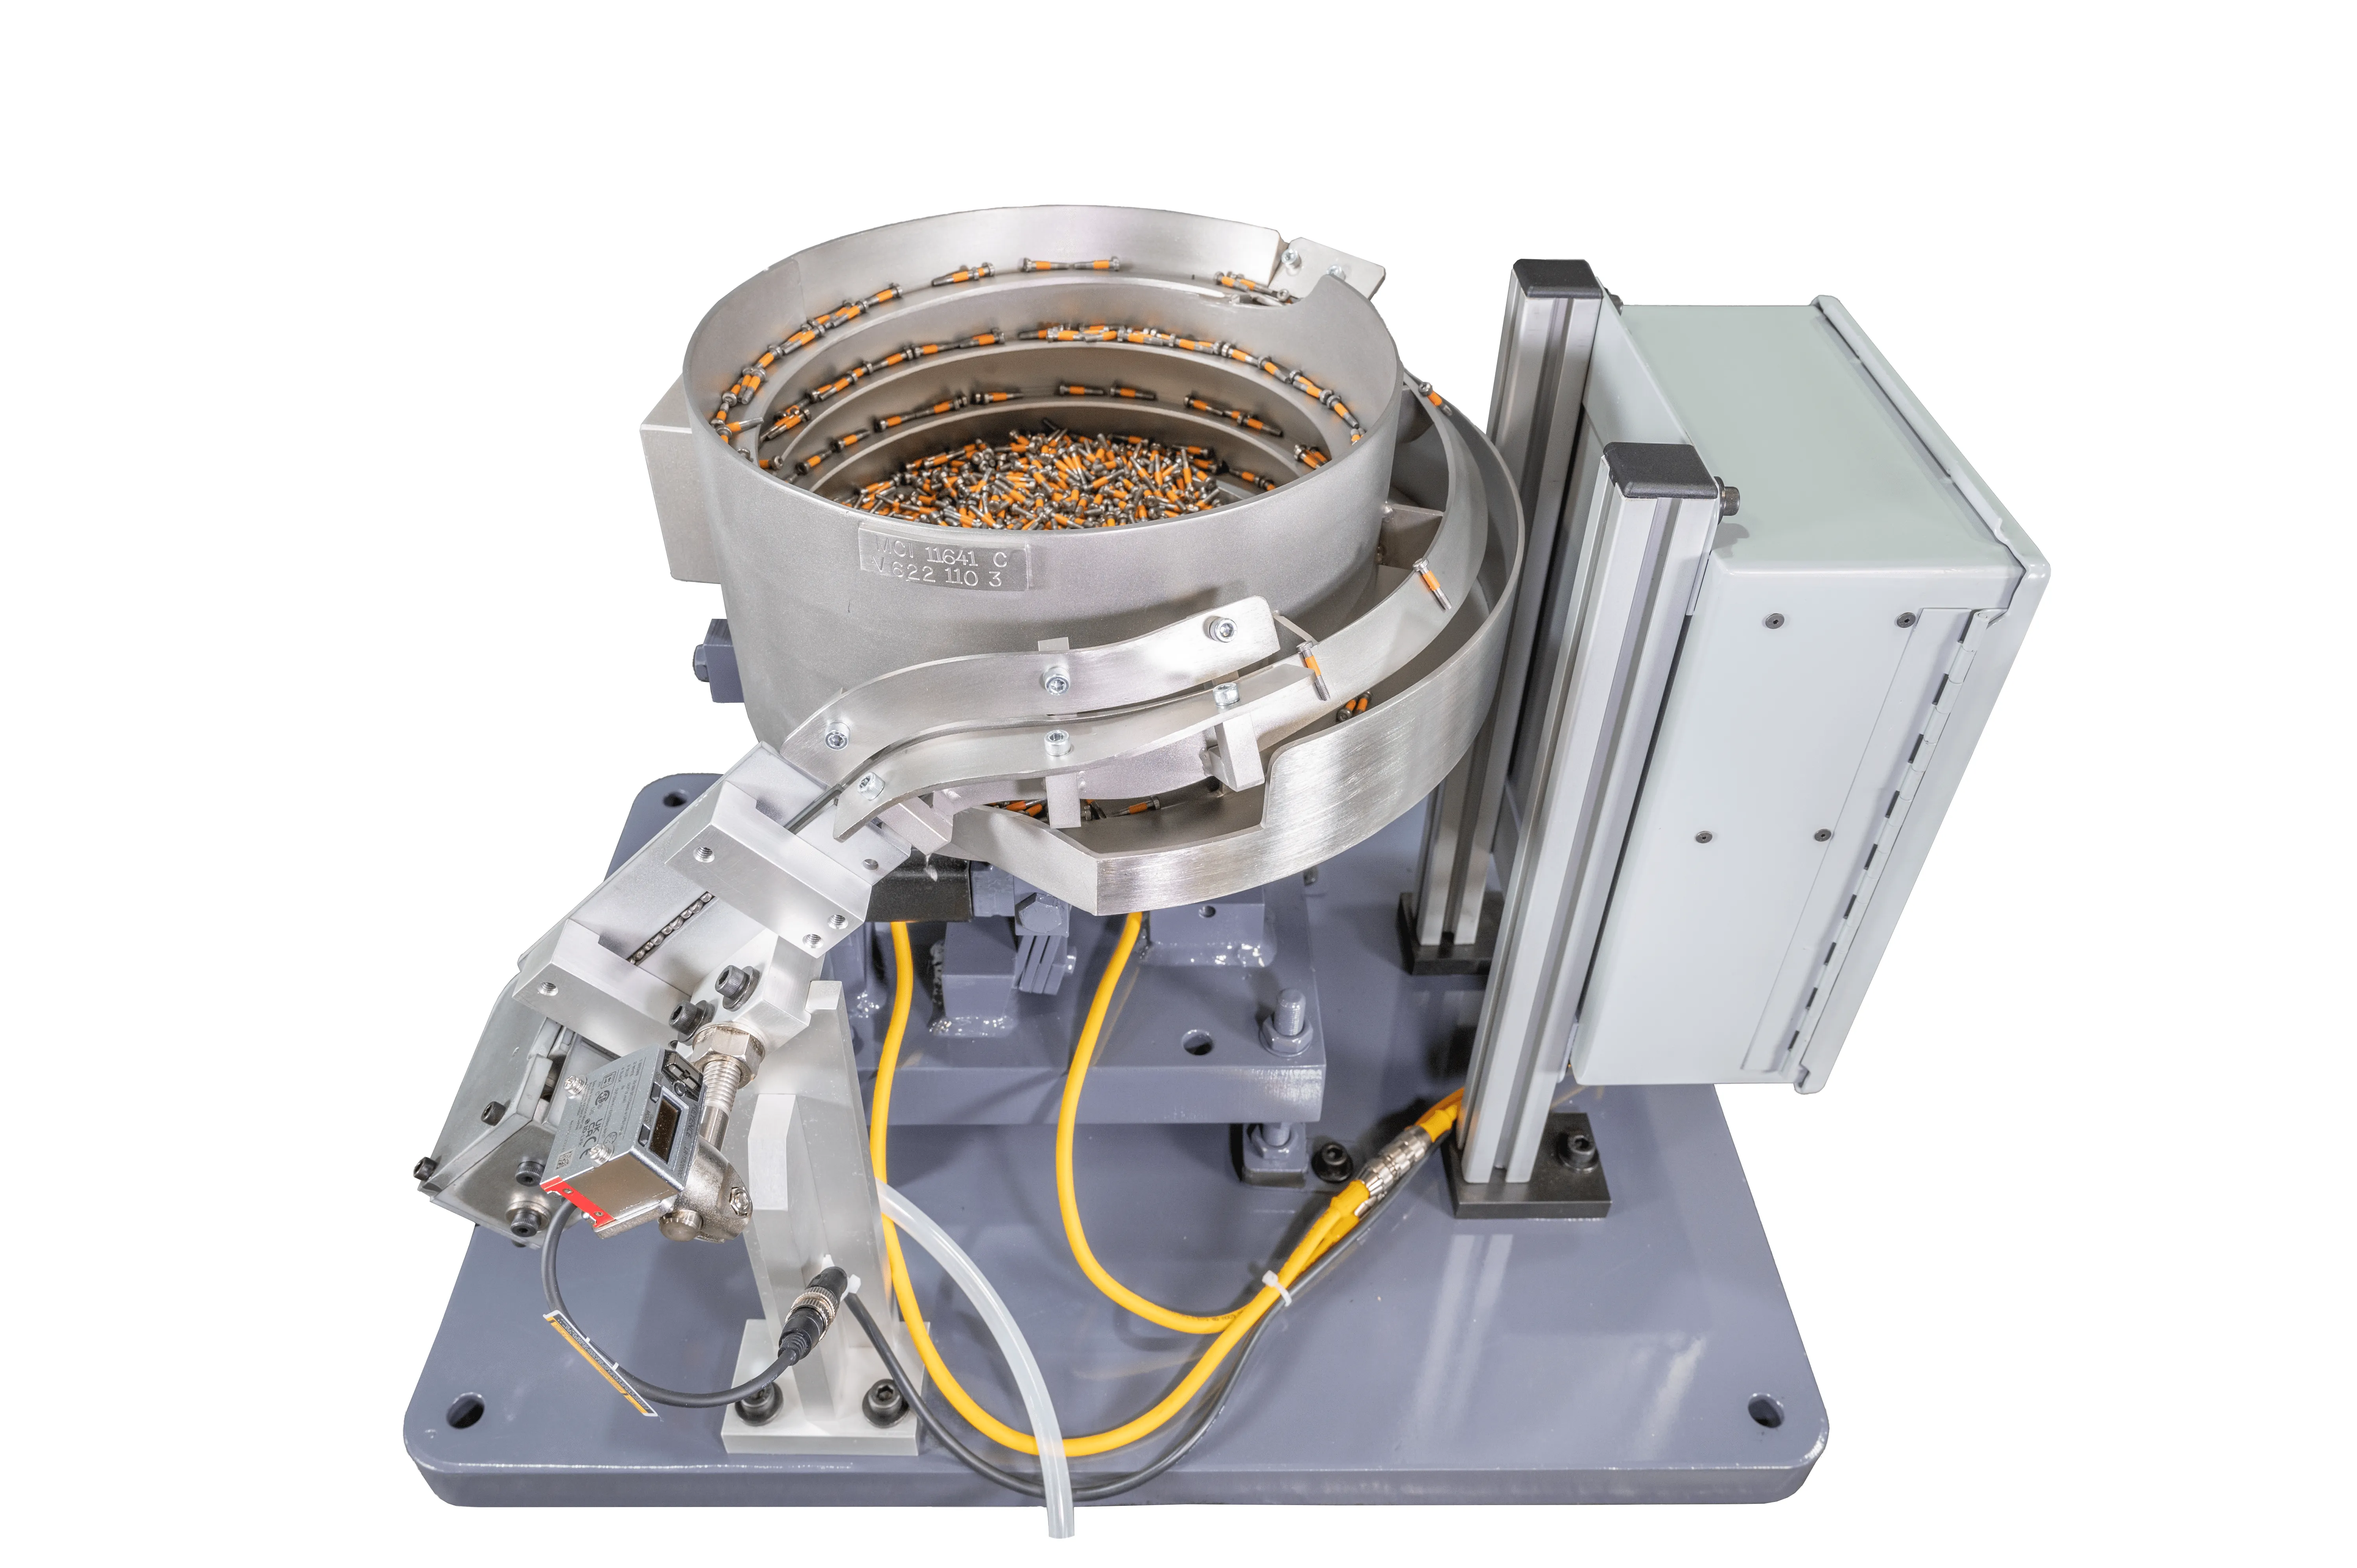 Industrial automated vibratory bowl feeder machine for sorting small parts.